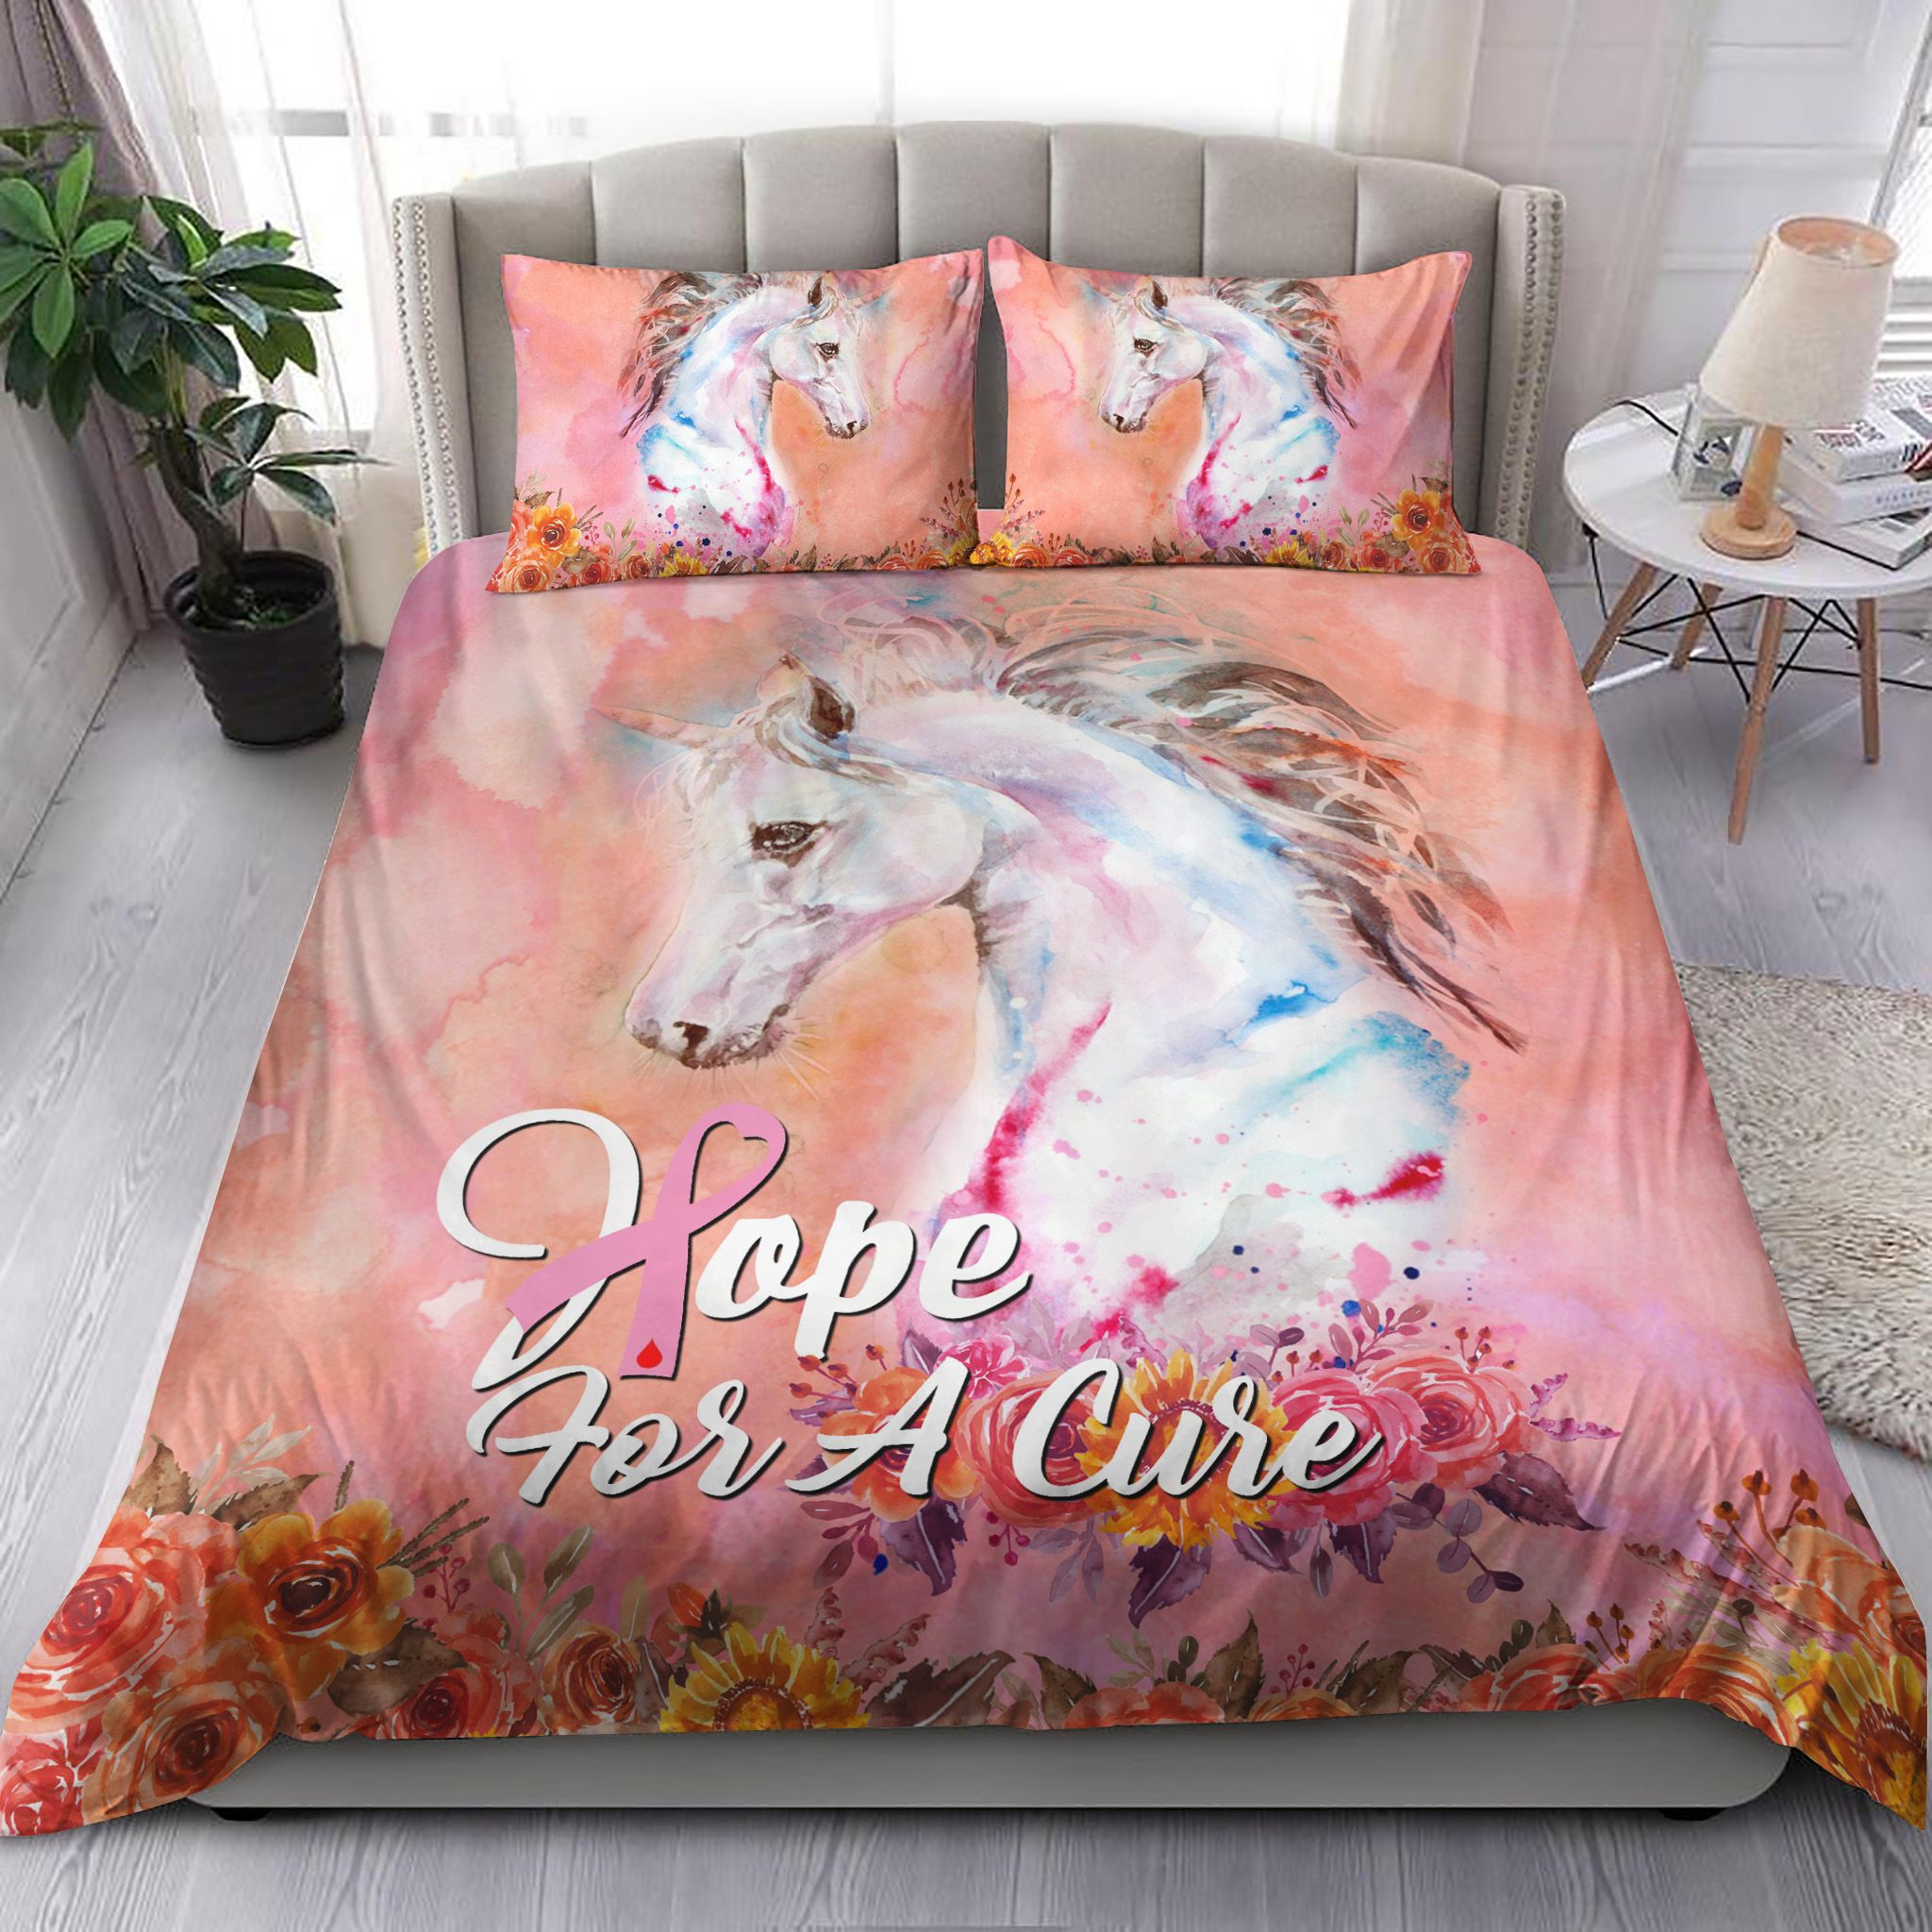 unicorn breast cancer support bedding collection bed sheets comforter duvet cover sets oukna